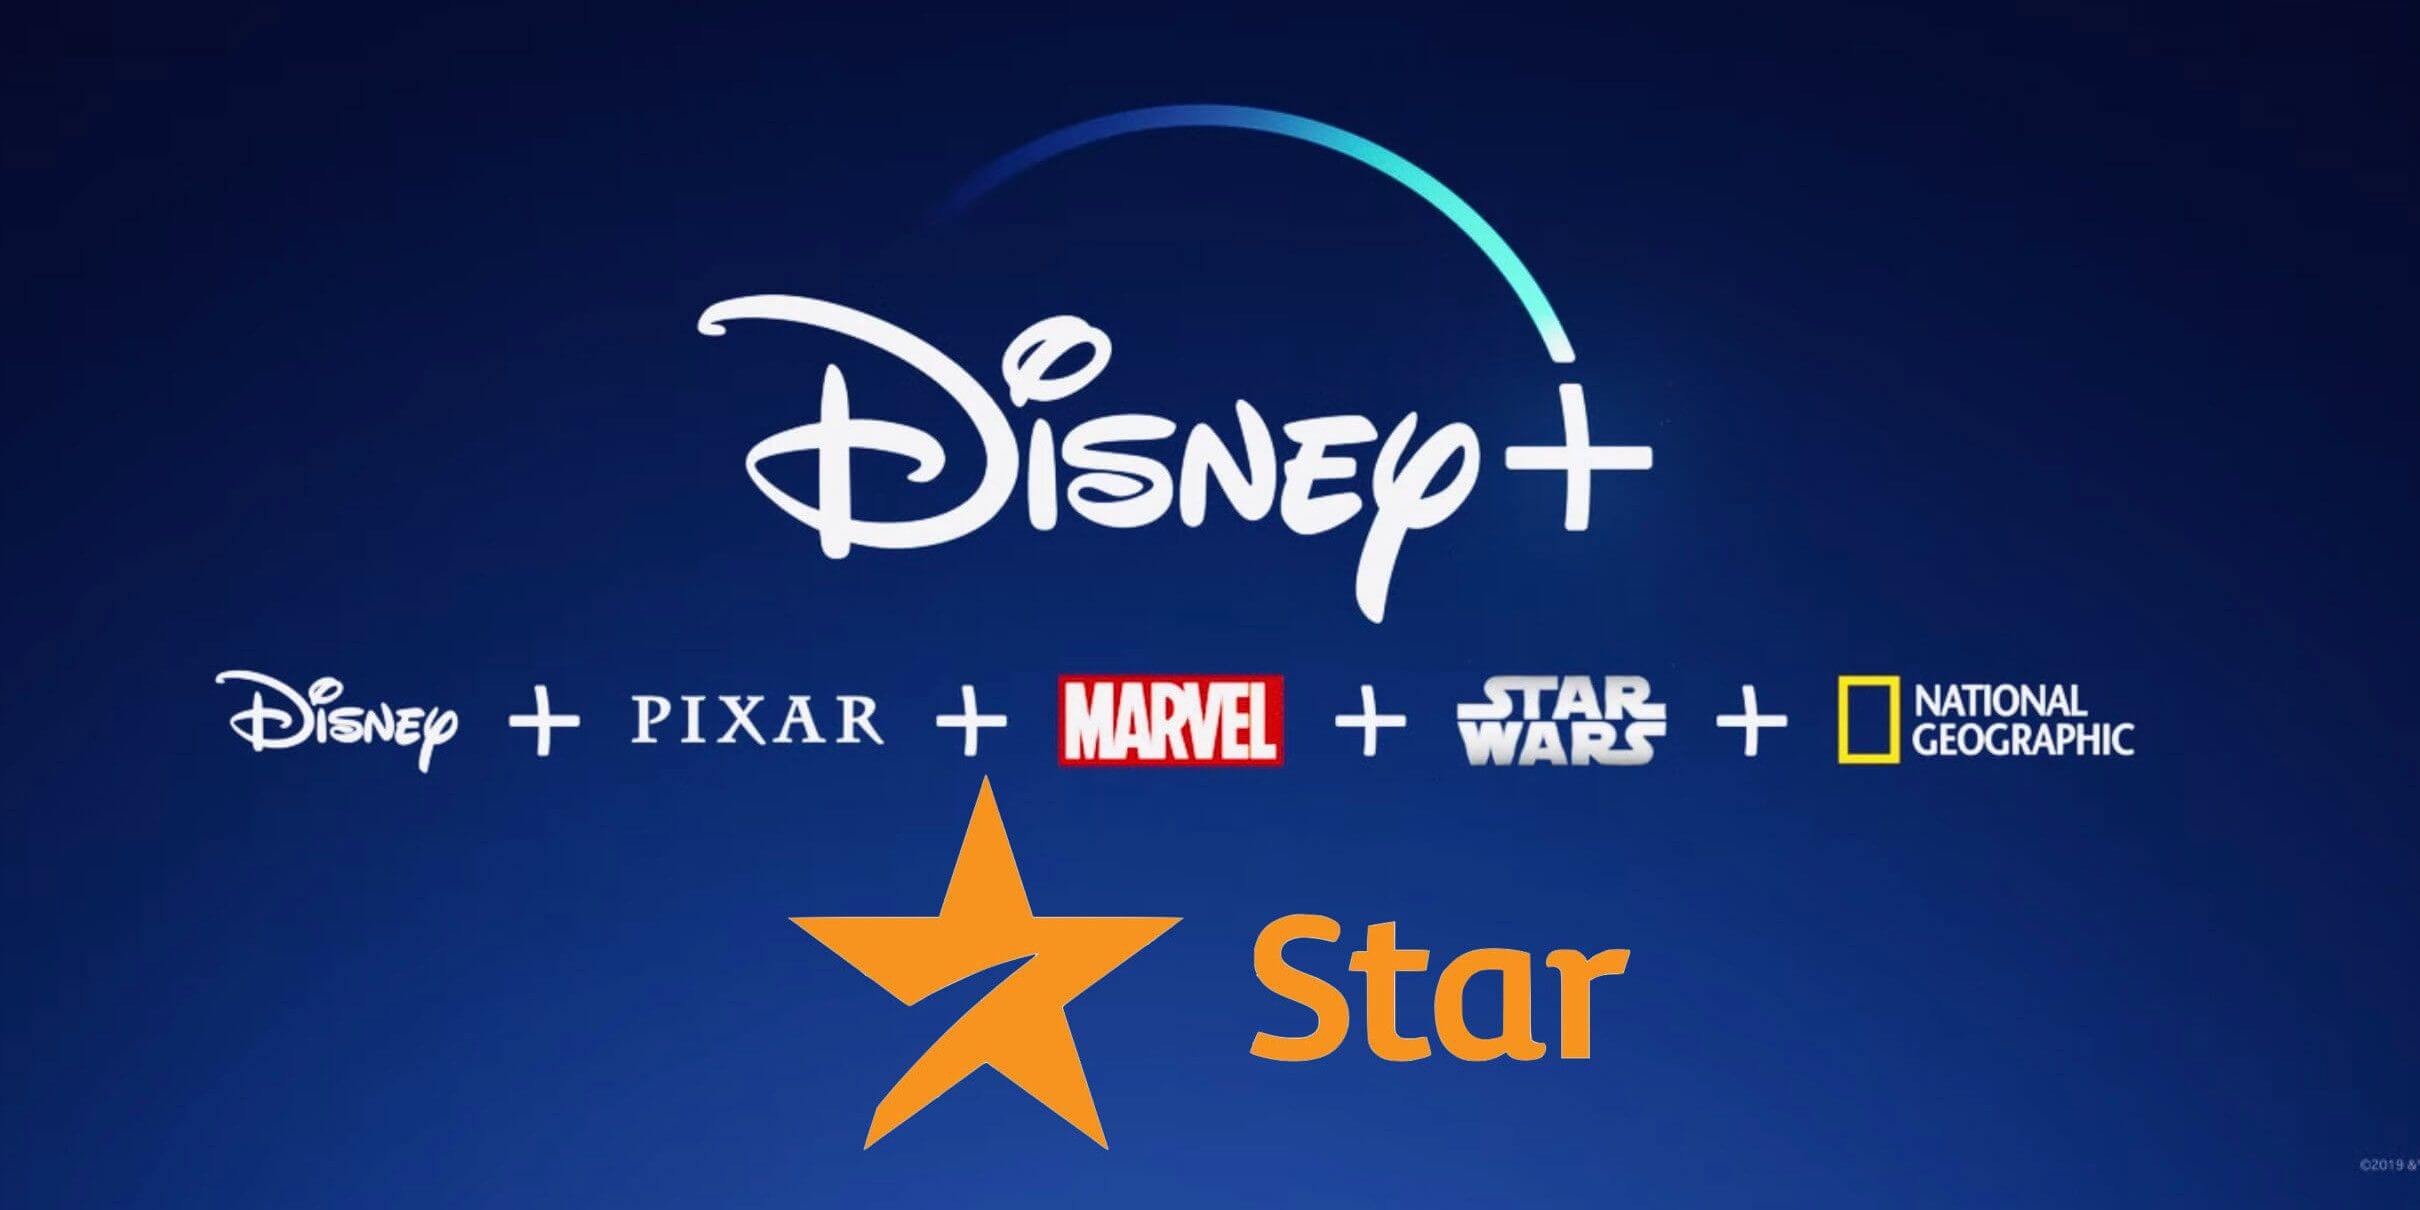 what's streaming on Disney+